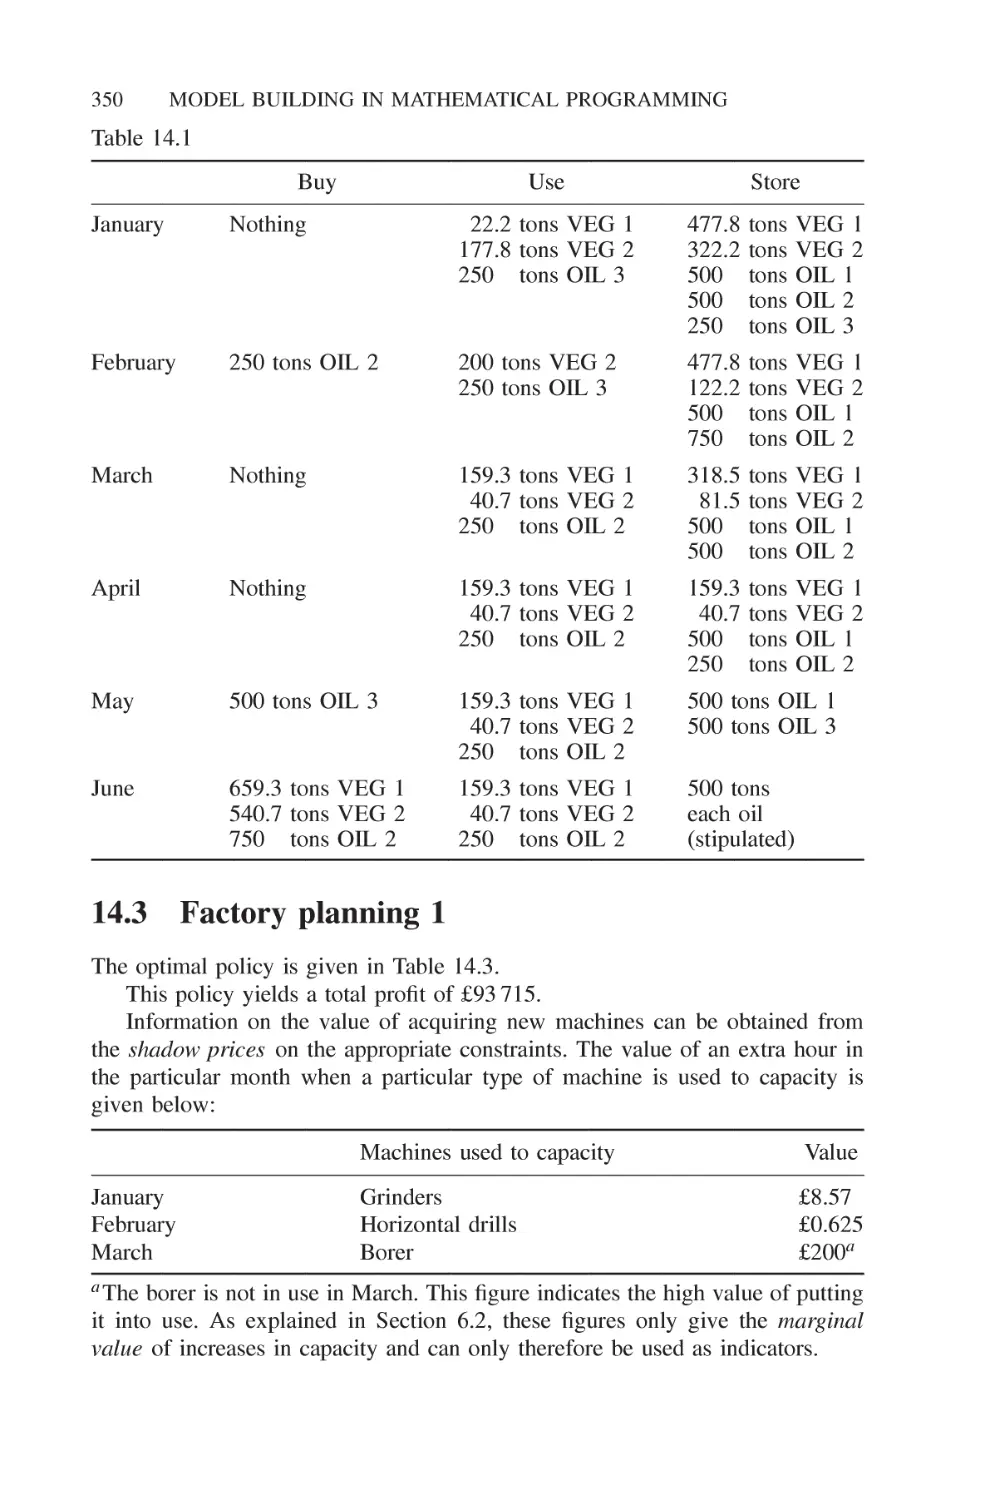 14.3 Factory planning 1